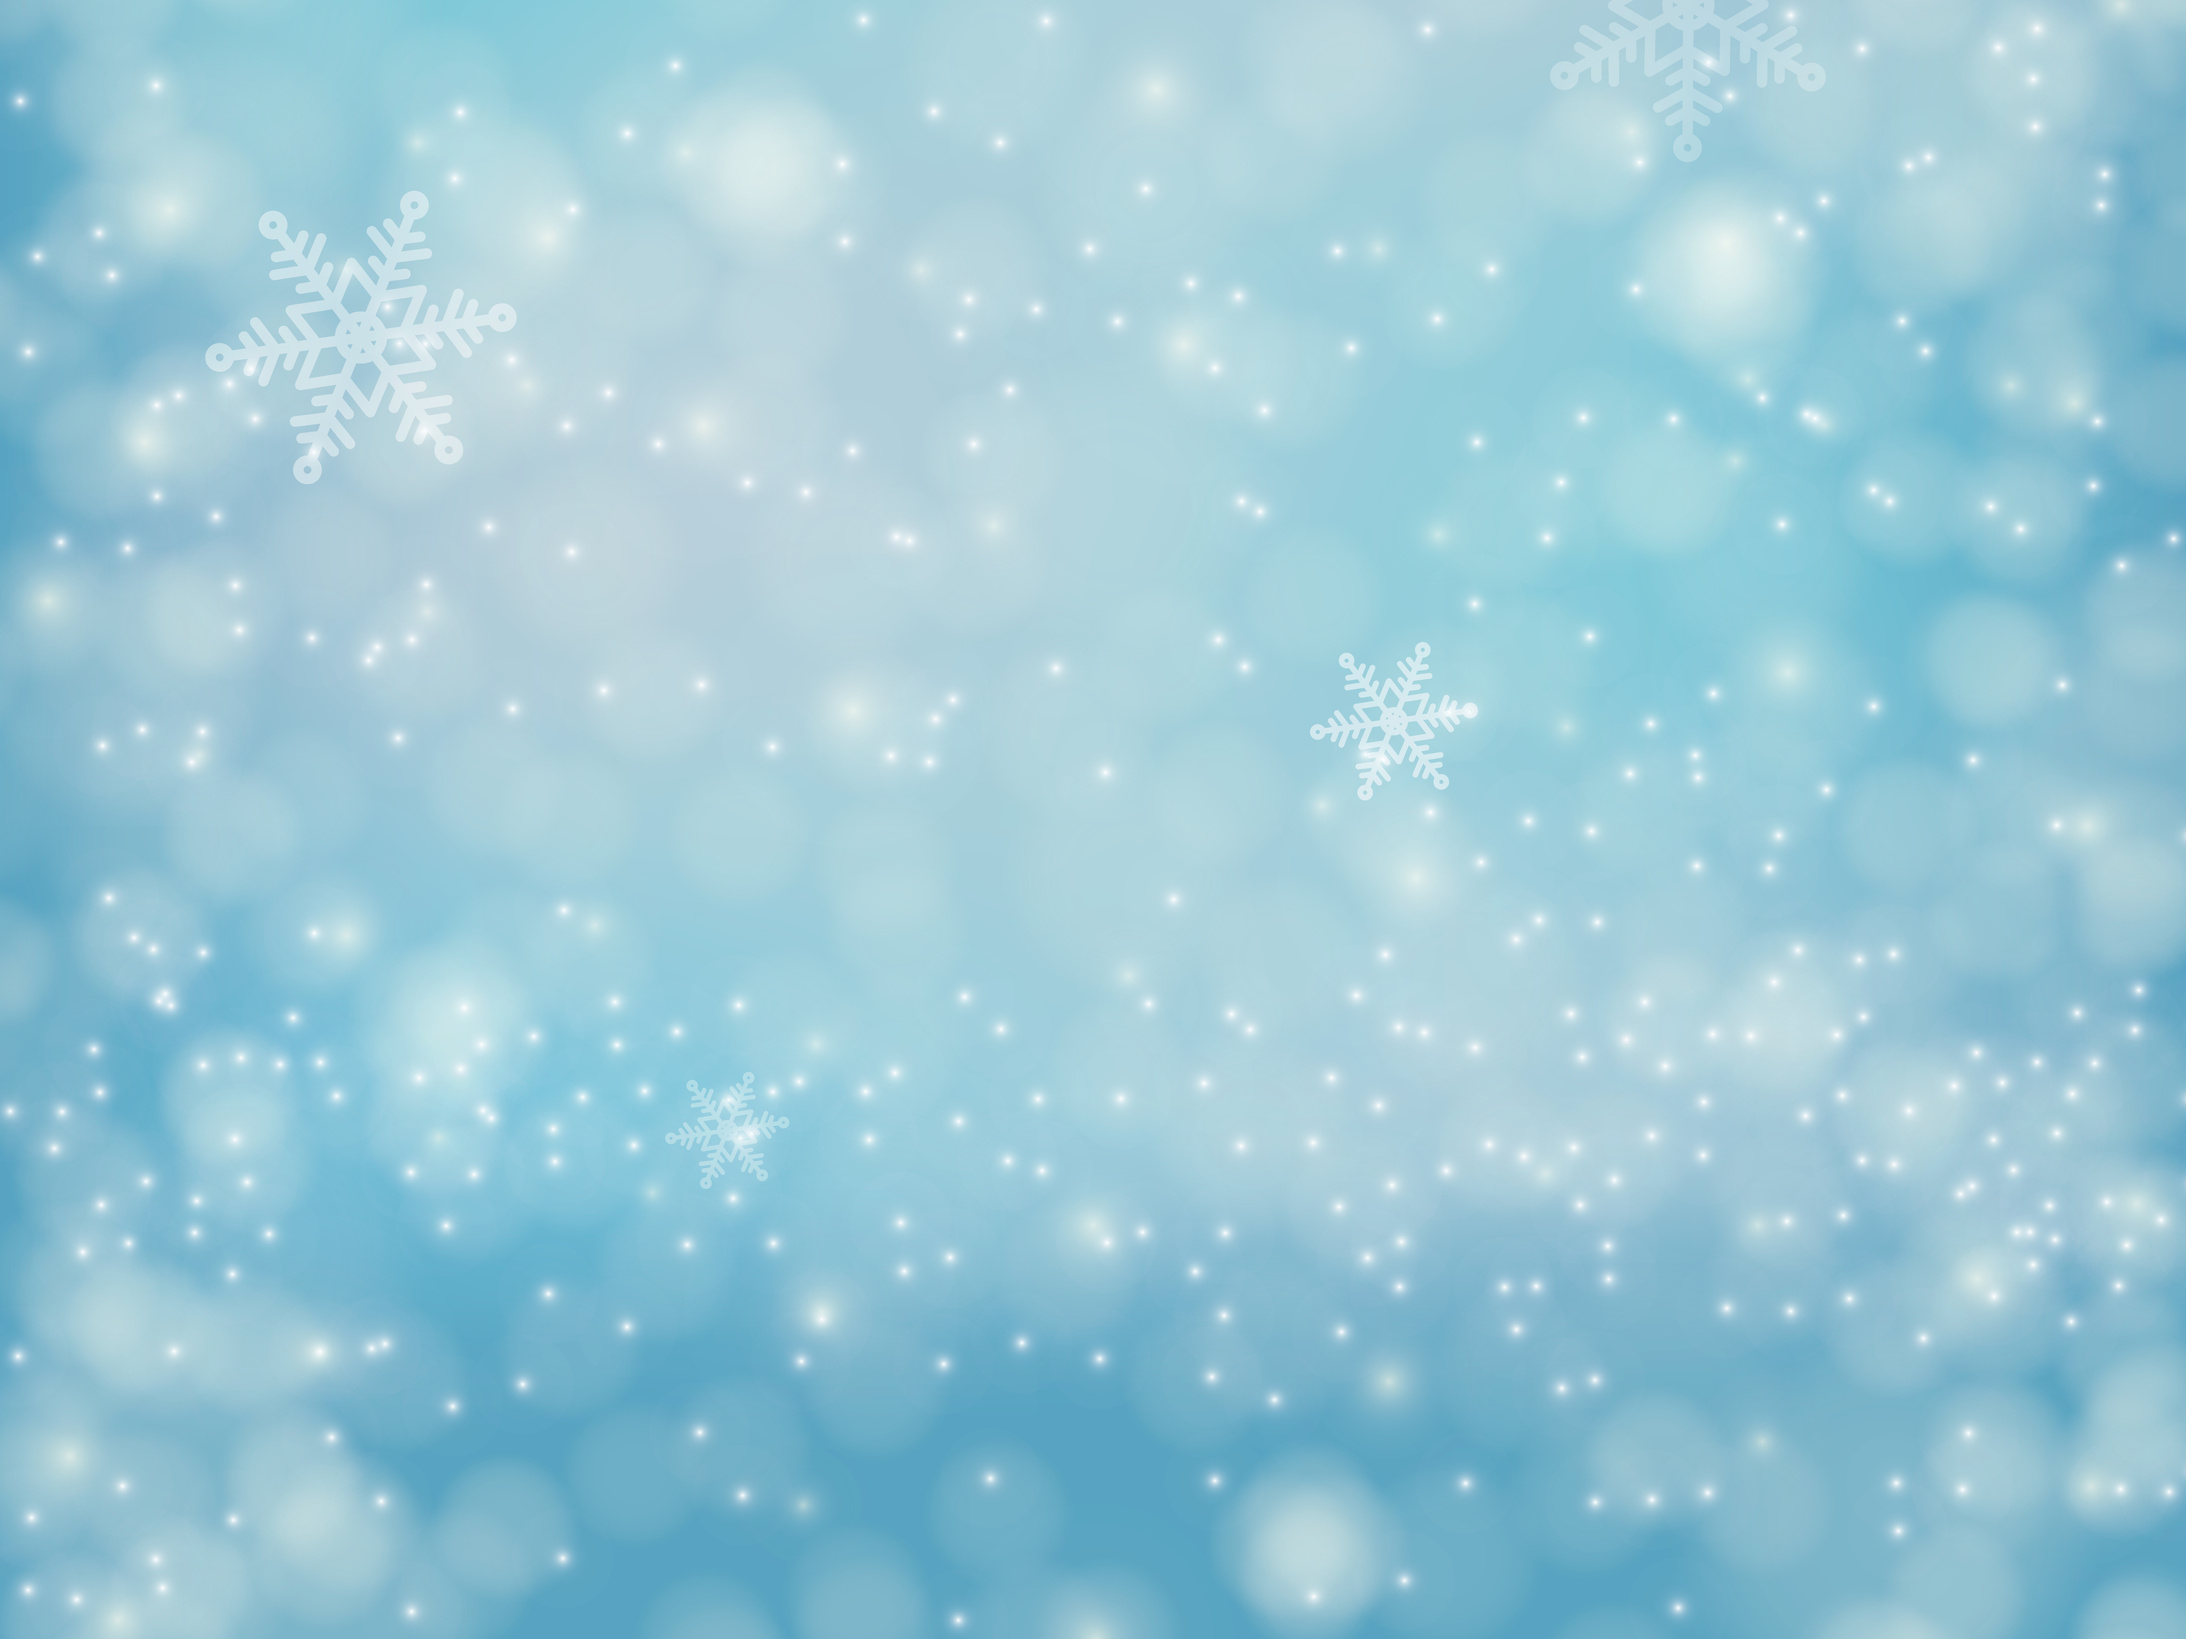 Blurred Snowflakes Background